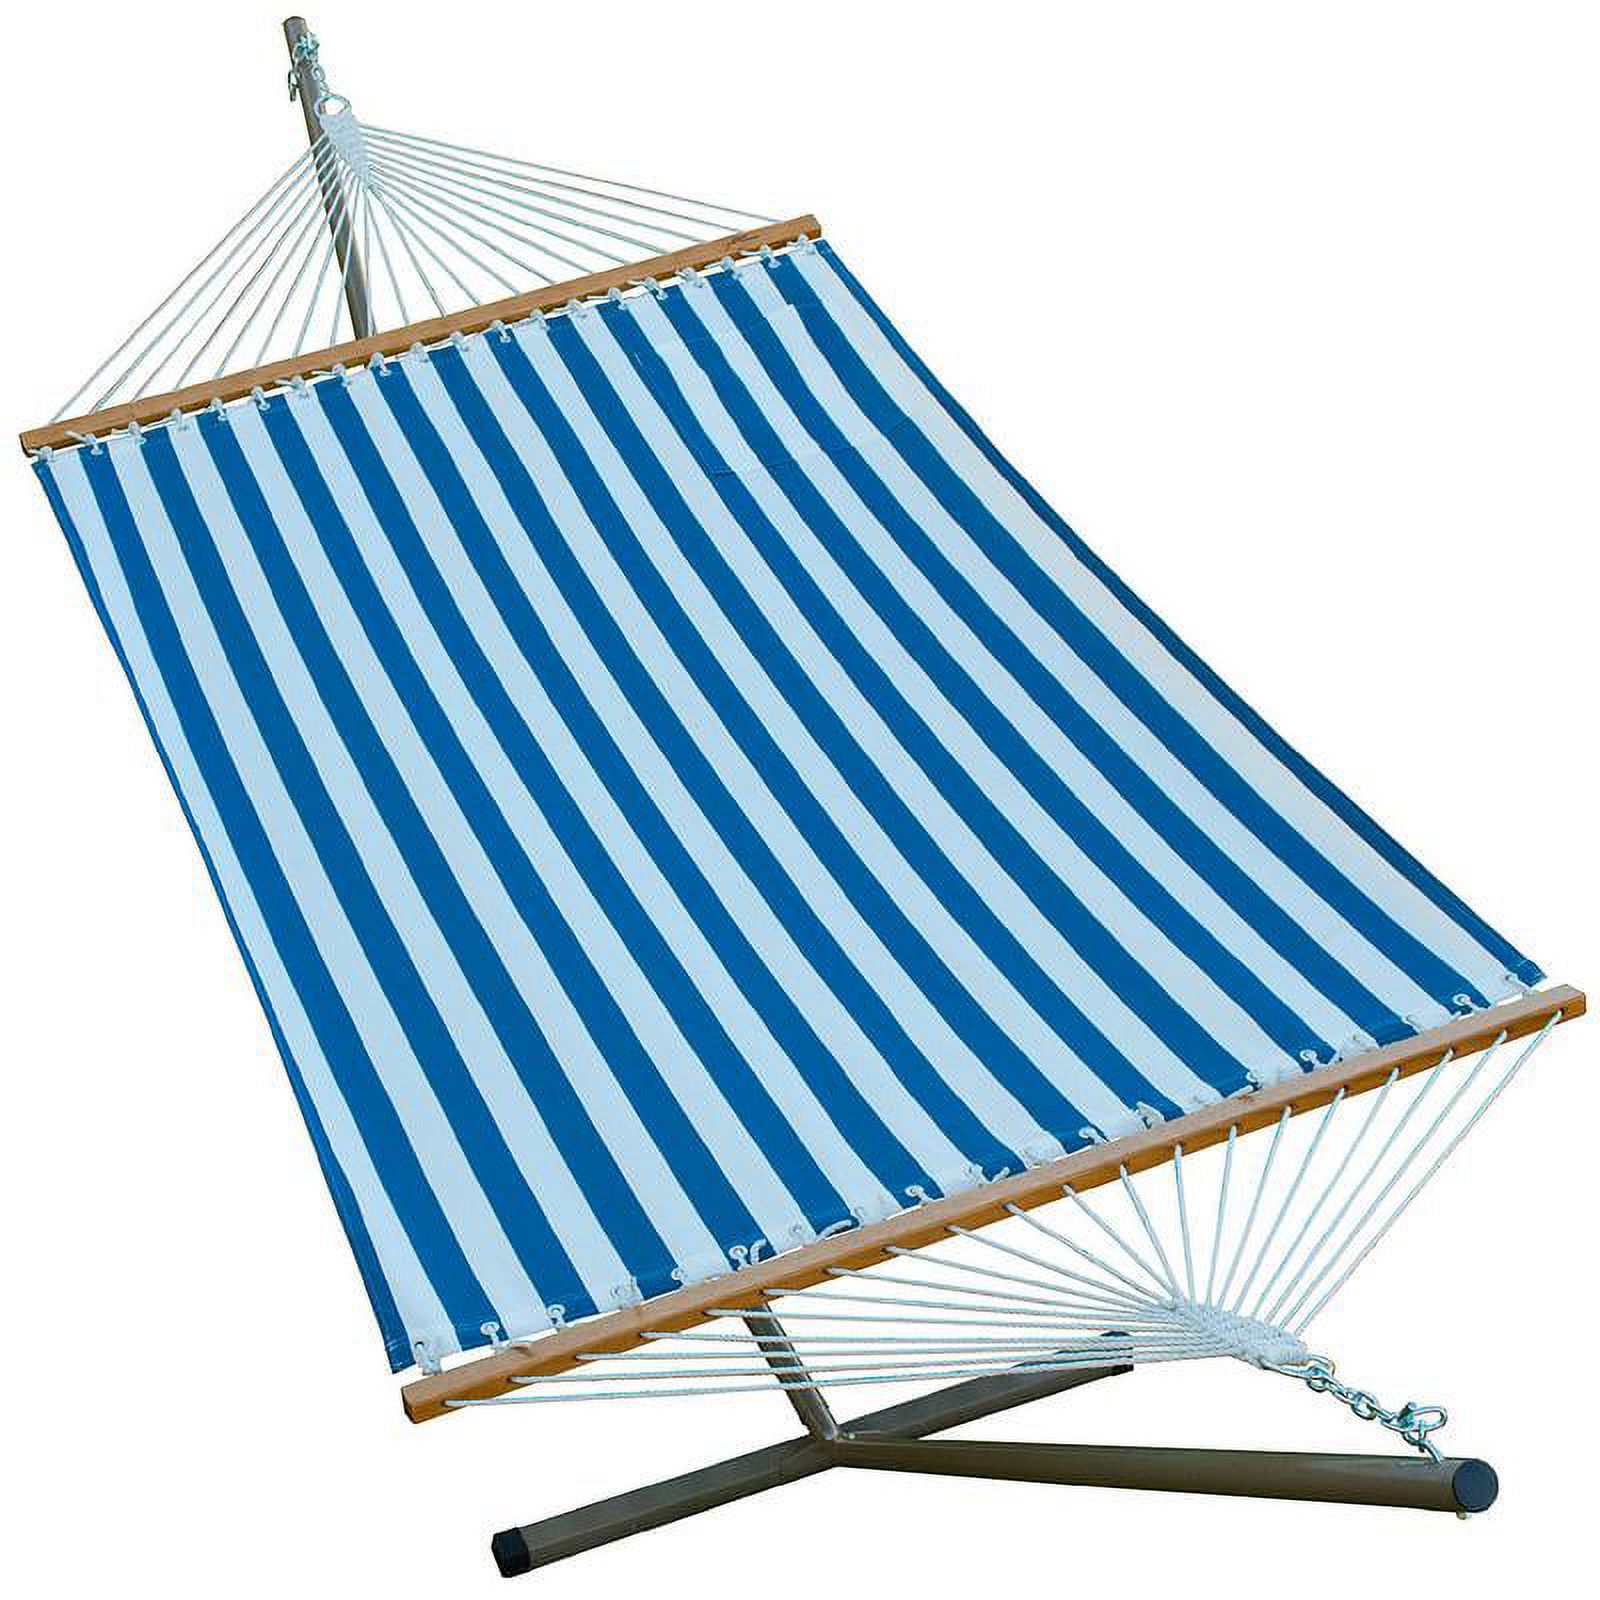 11' Fabric Hammock and Stand Combination - image 1 of 2